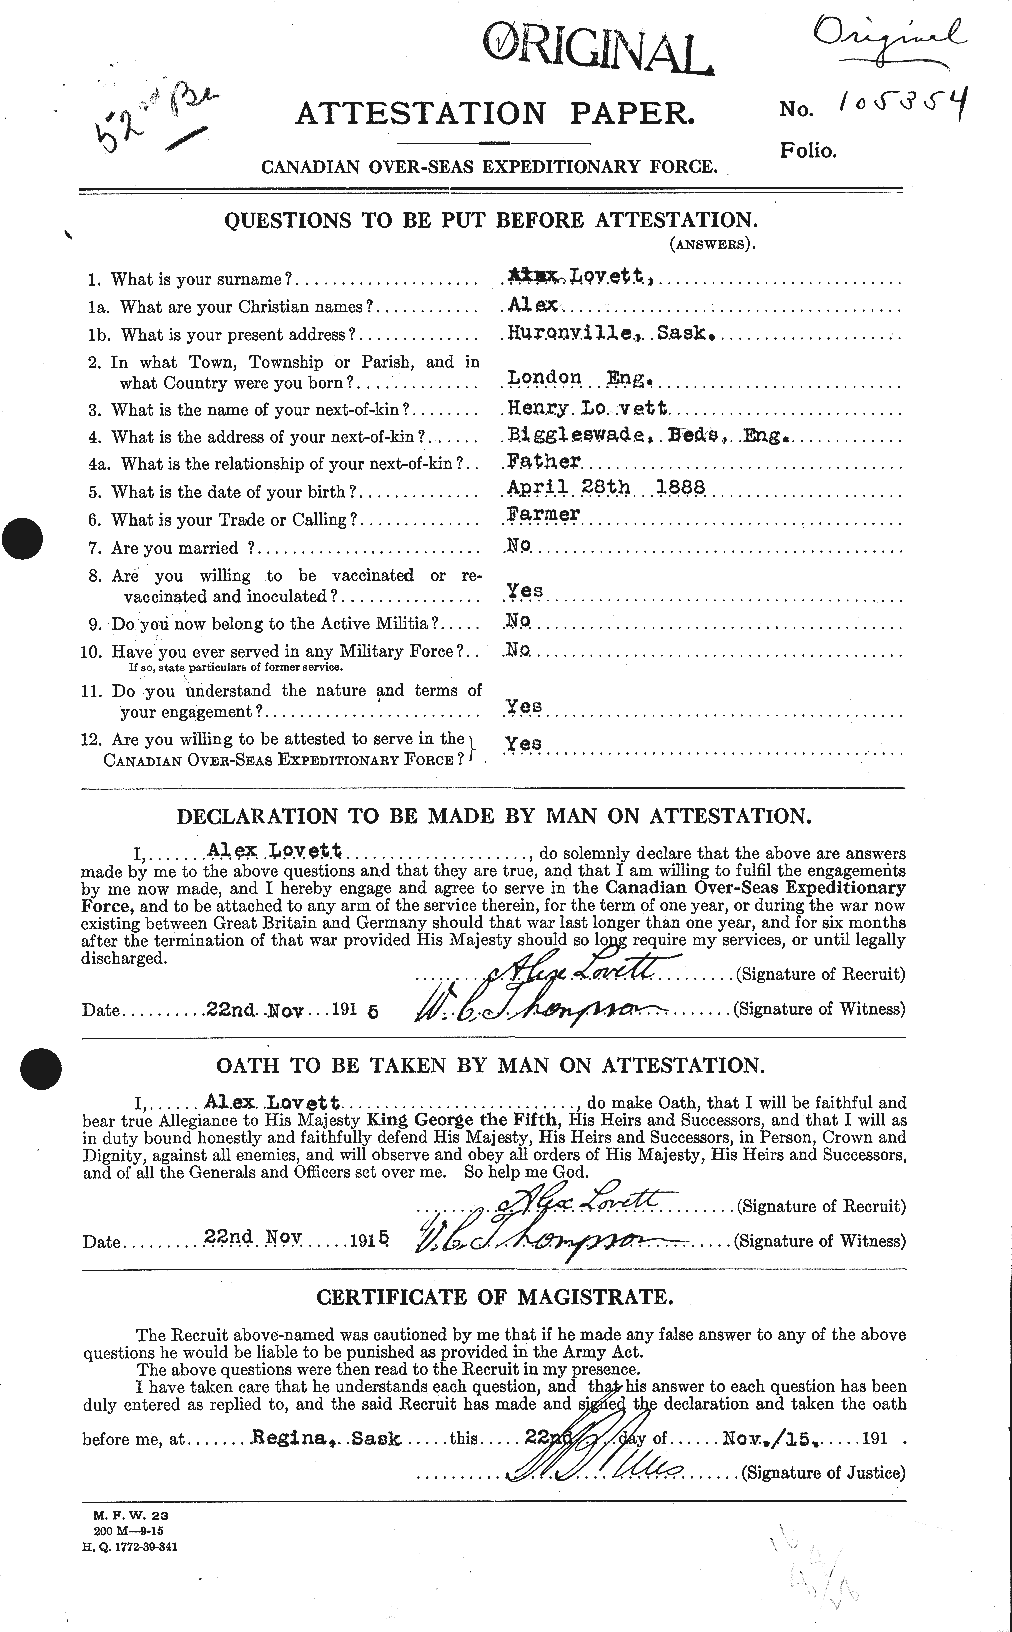 Personnel Records of the First World War - CEF 475471a